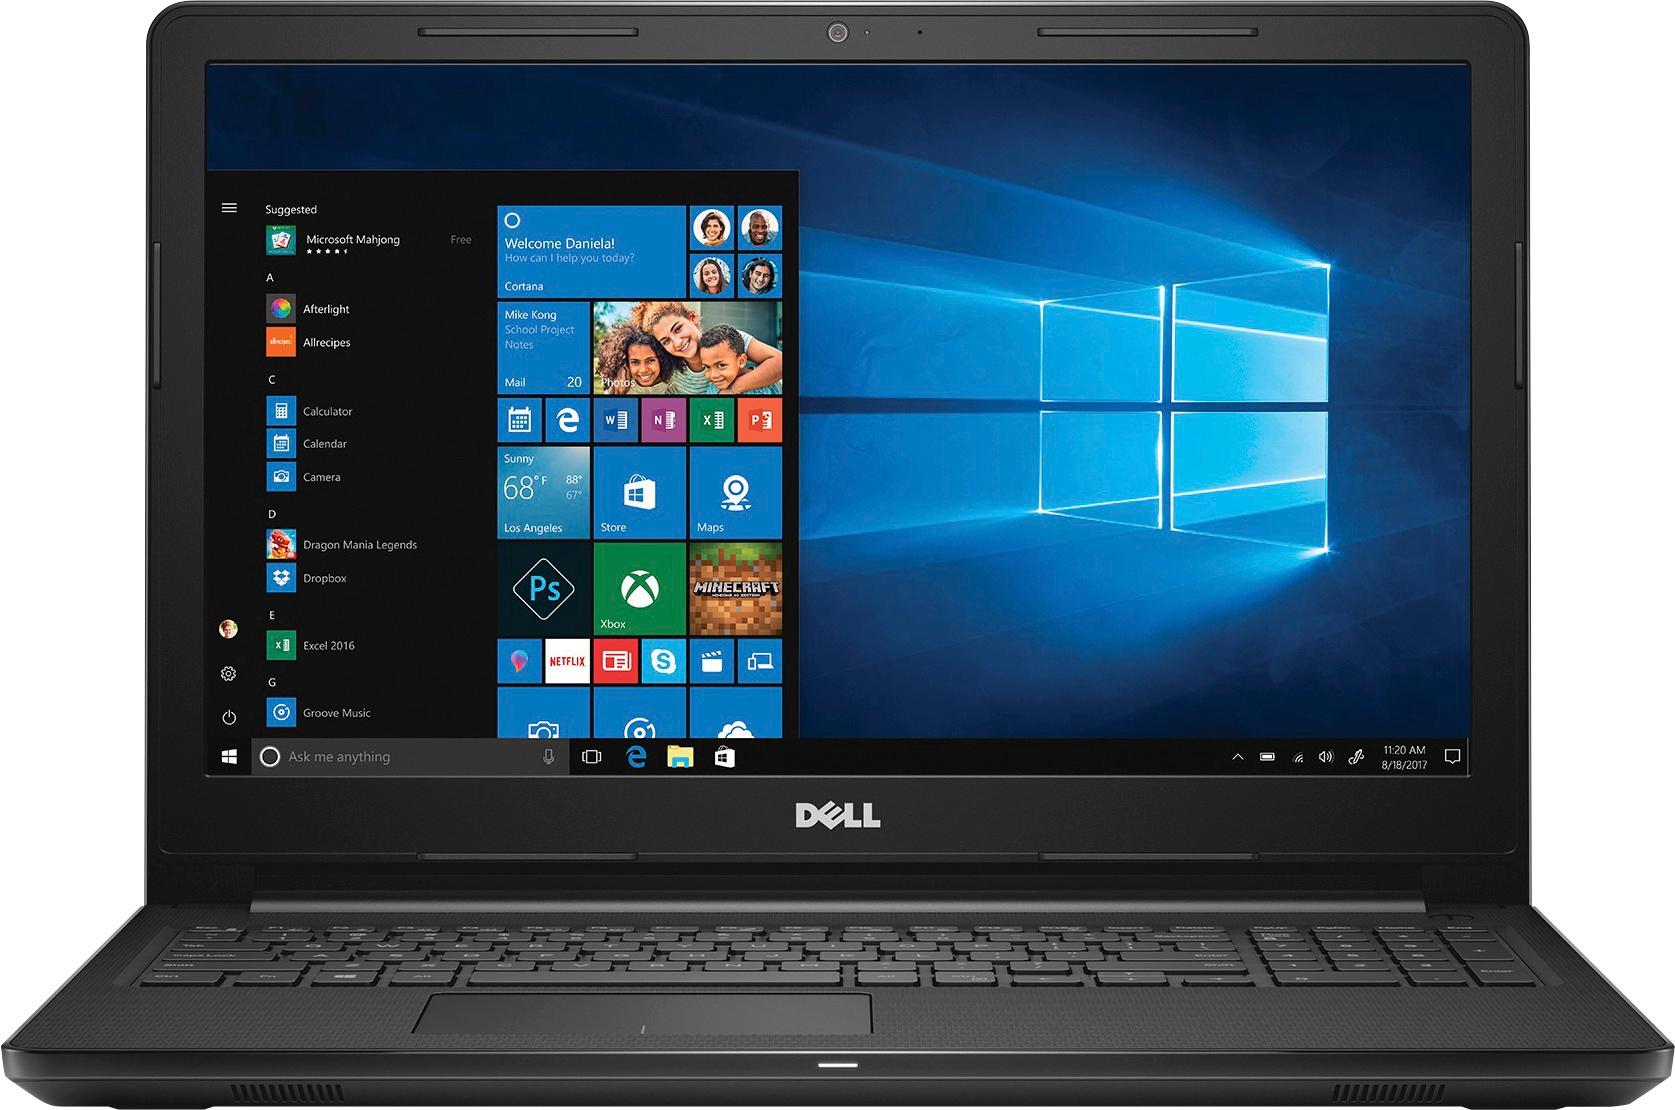 Questions and Answers: Dell Inspiron 15.6" Laptop Intel Core i3 8GB